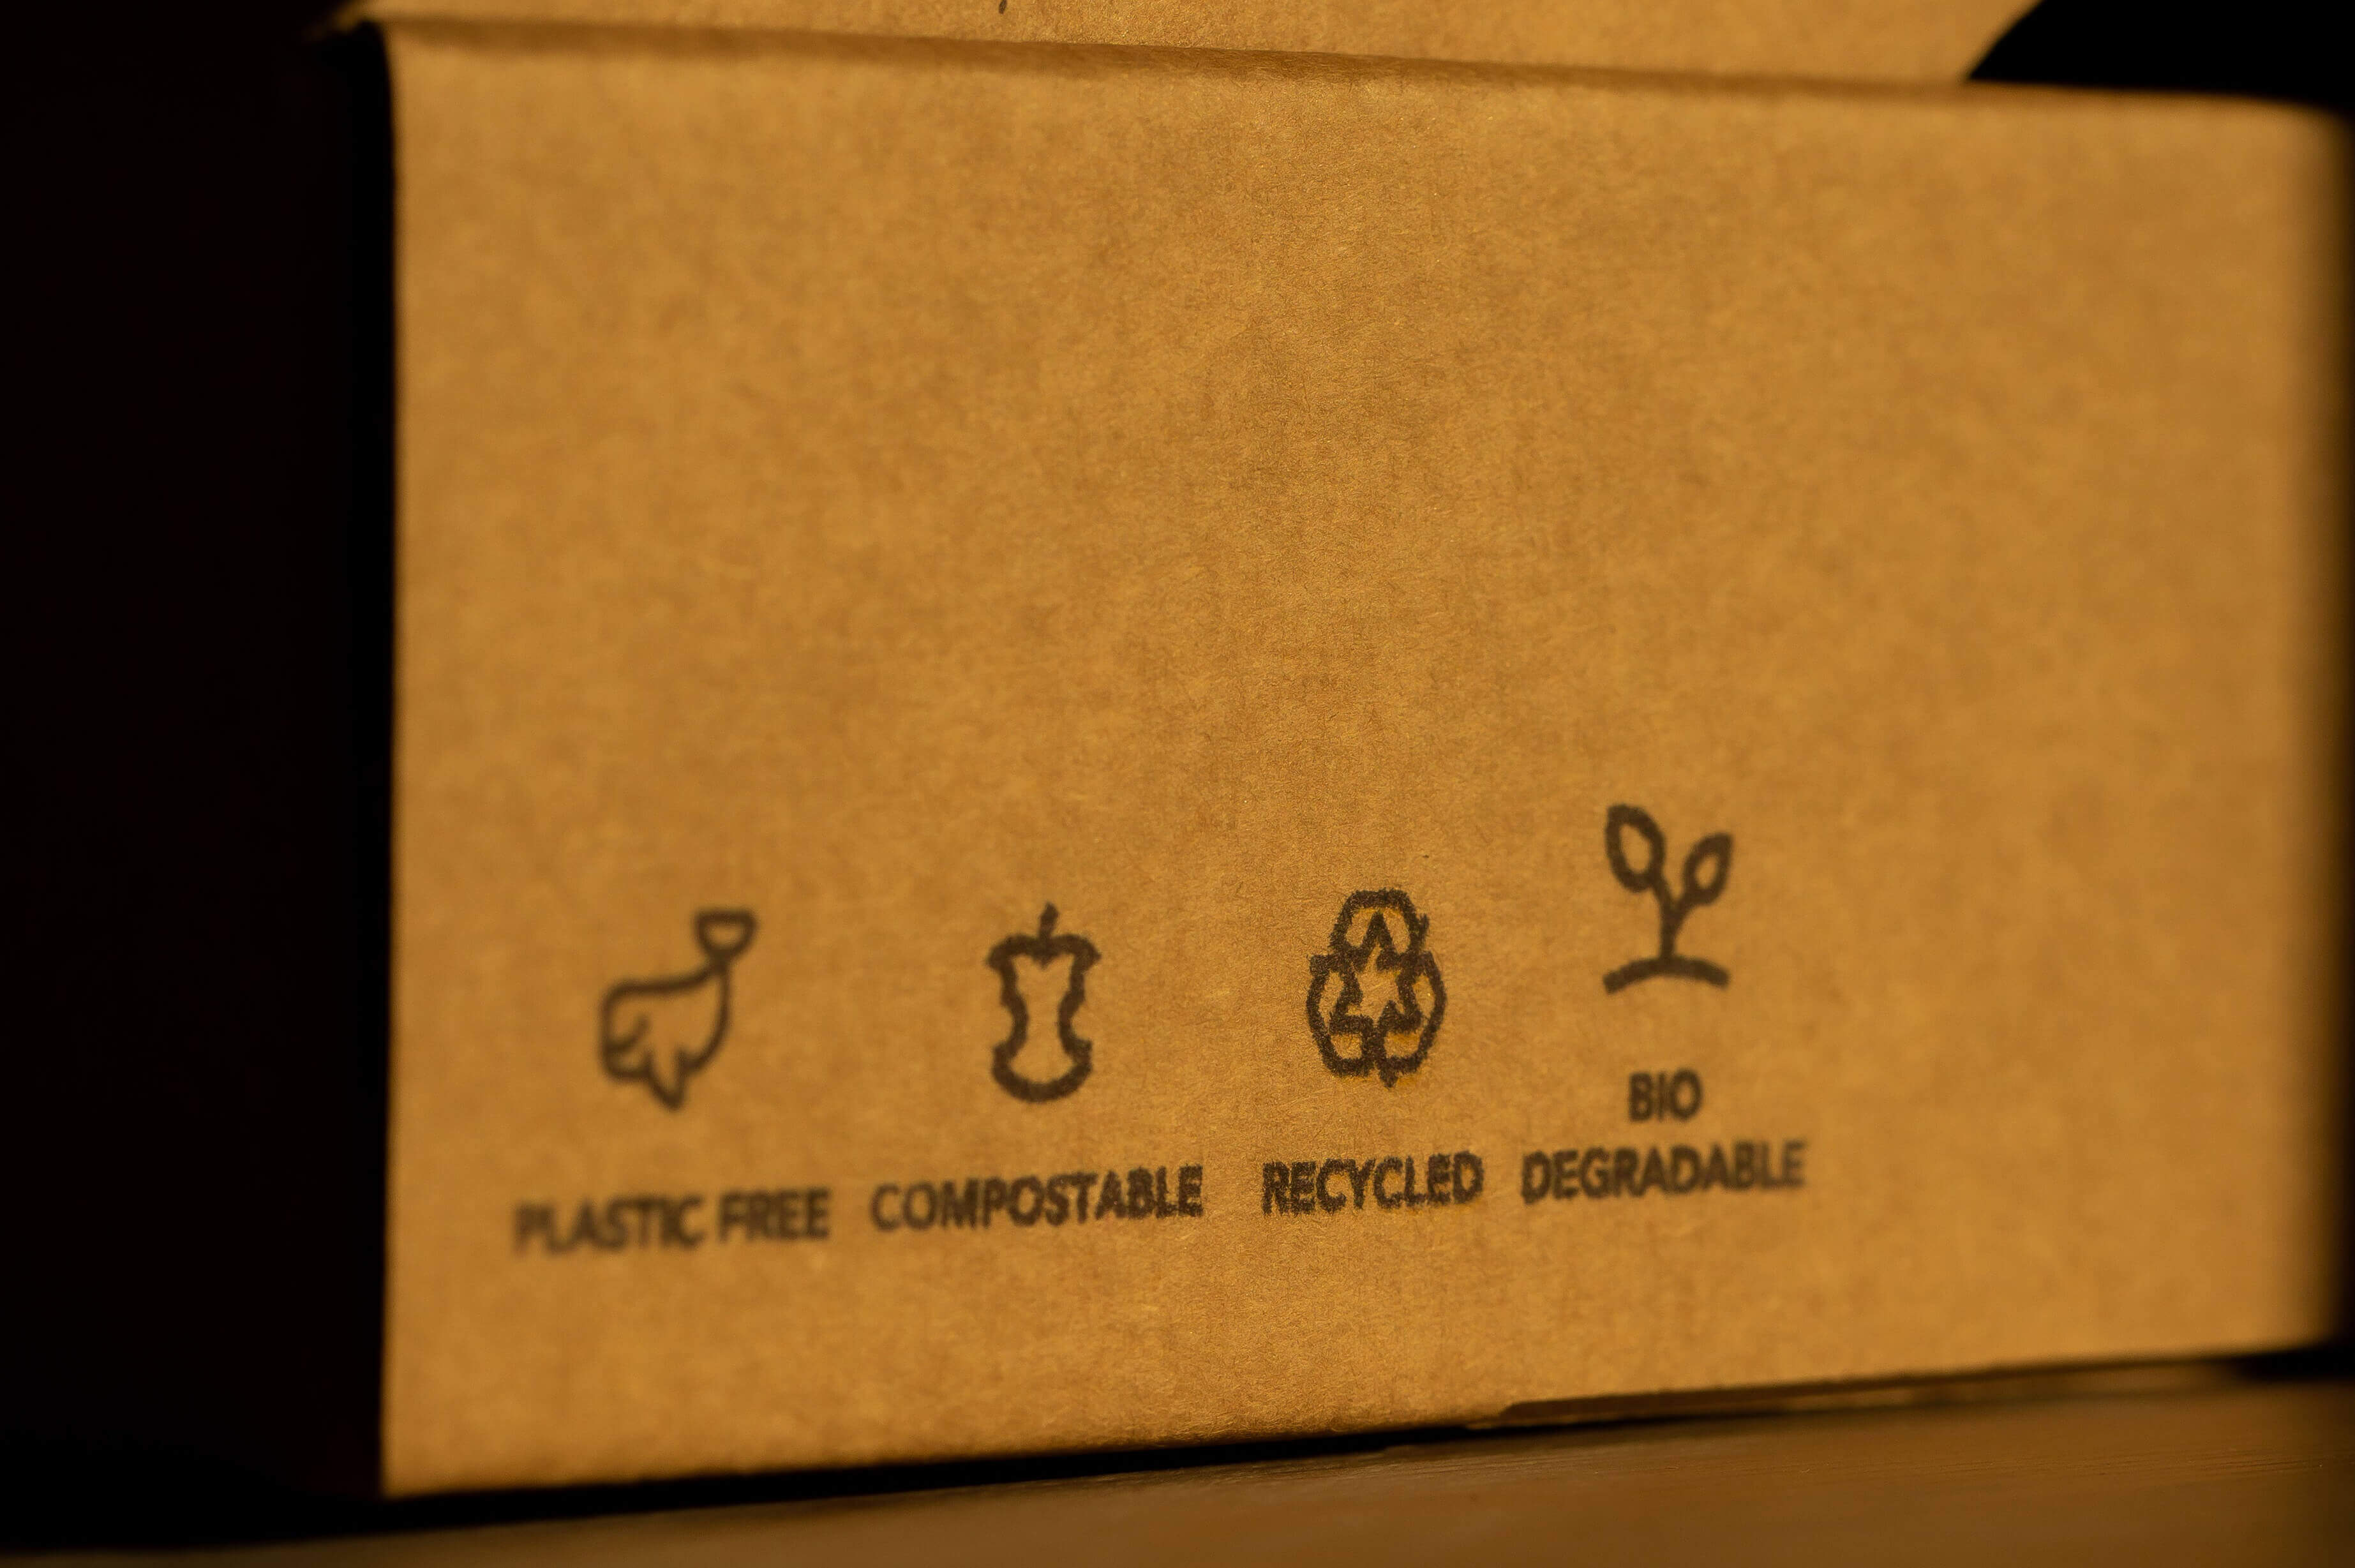 Recyclable versus Biodegradable